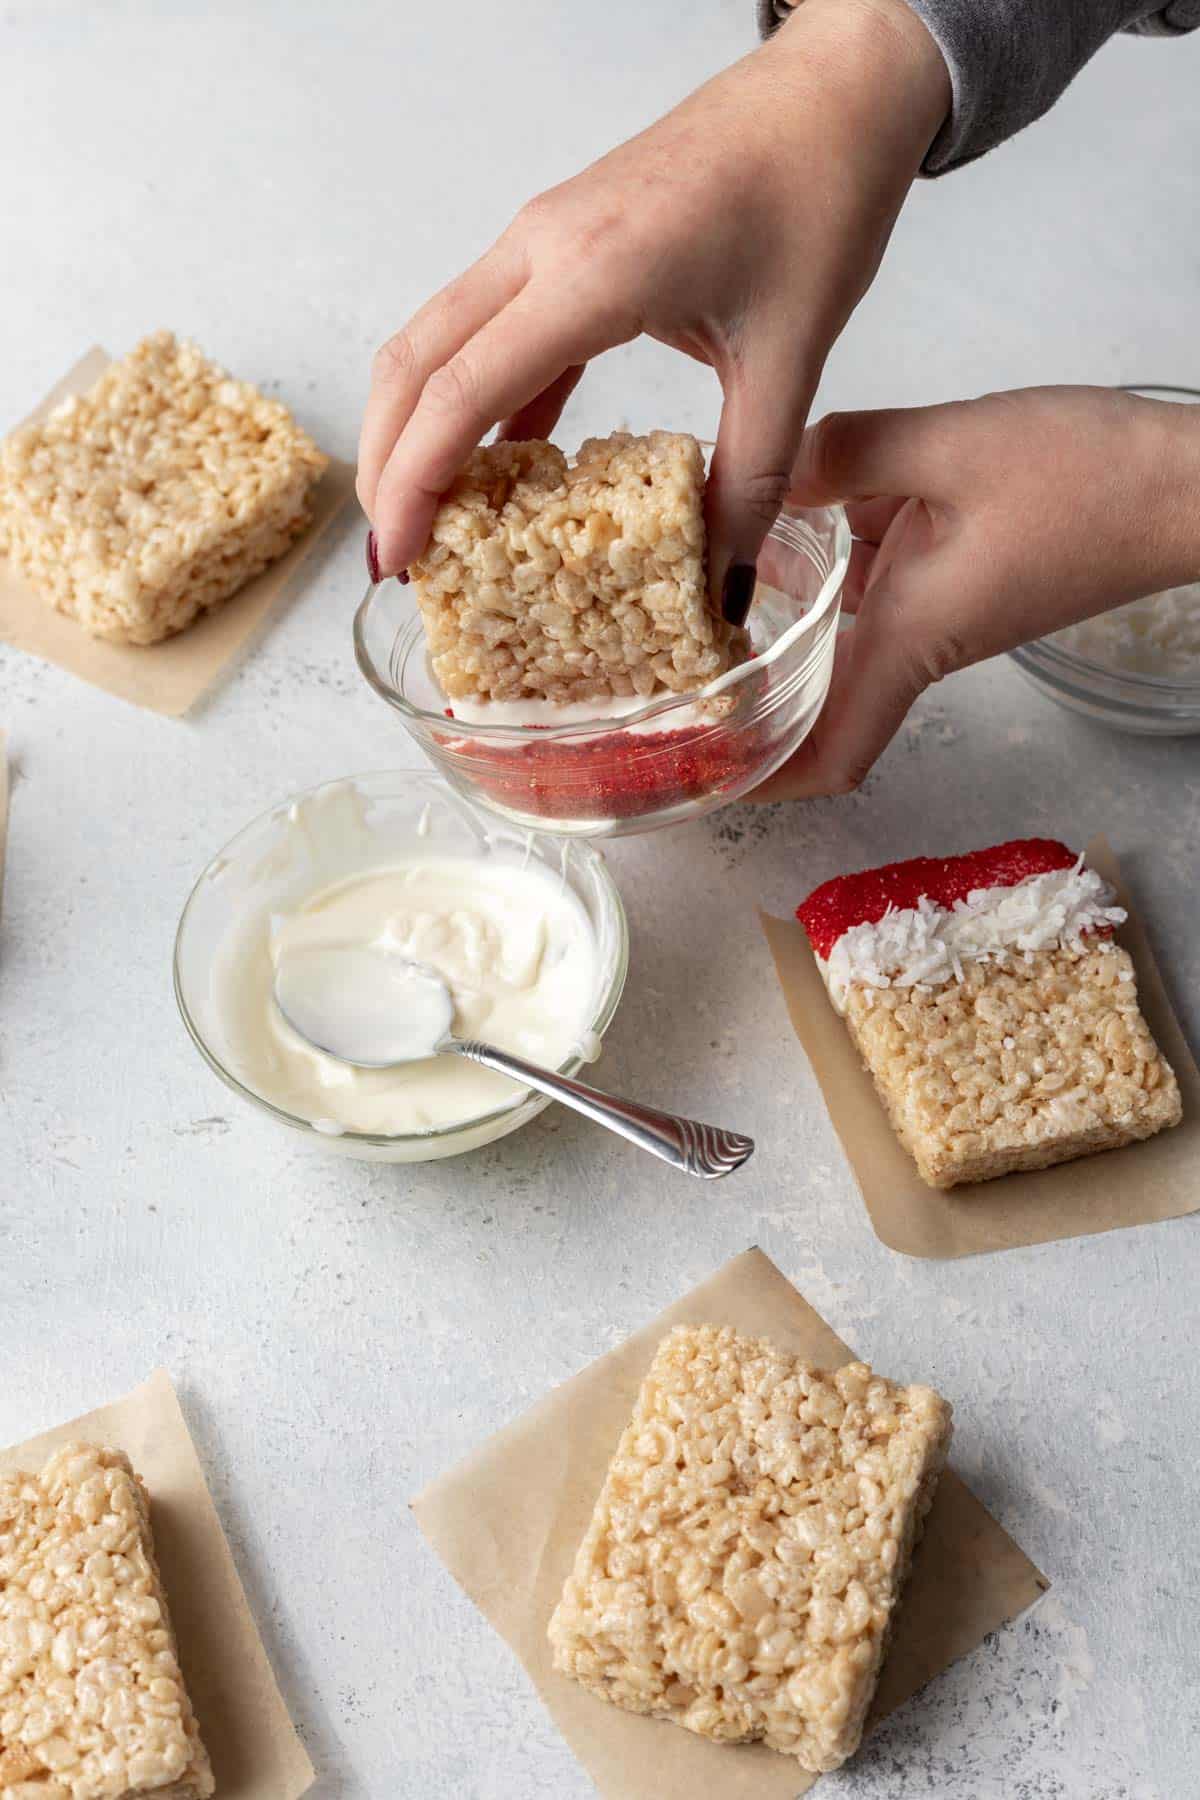 Top of a rice krispie treat dipped in melted white chocolate then in red sugar.